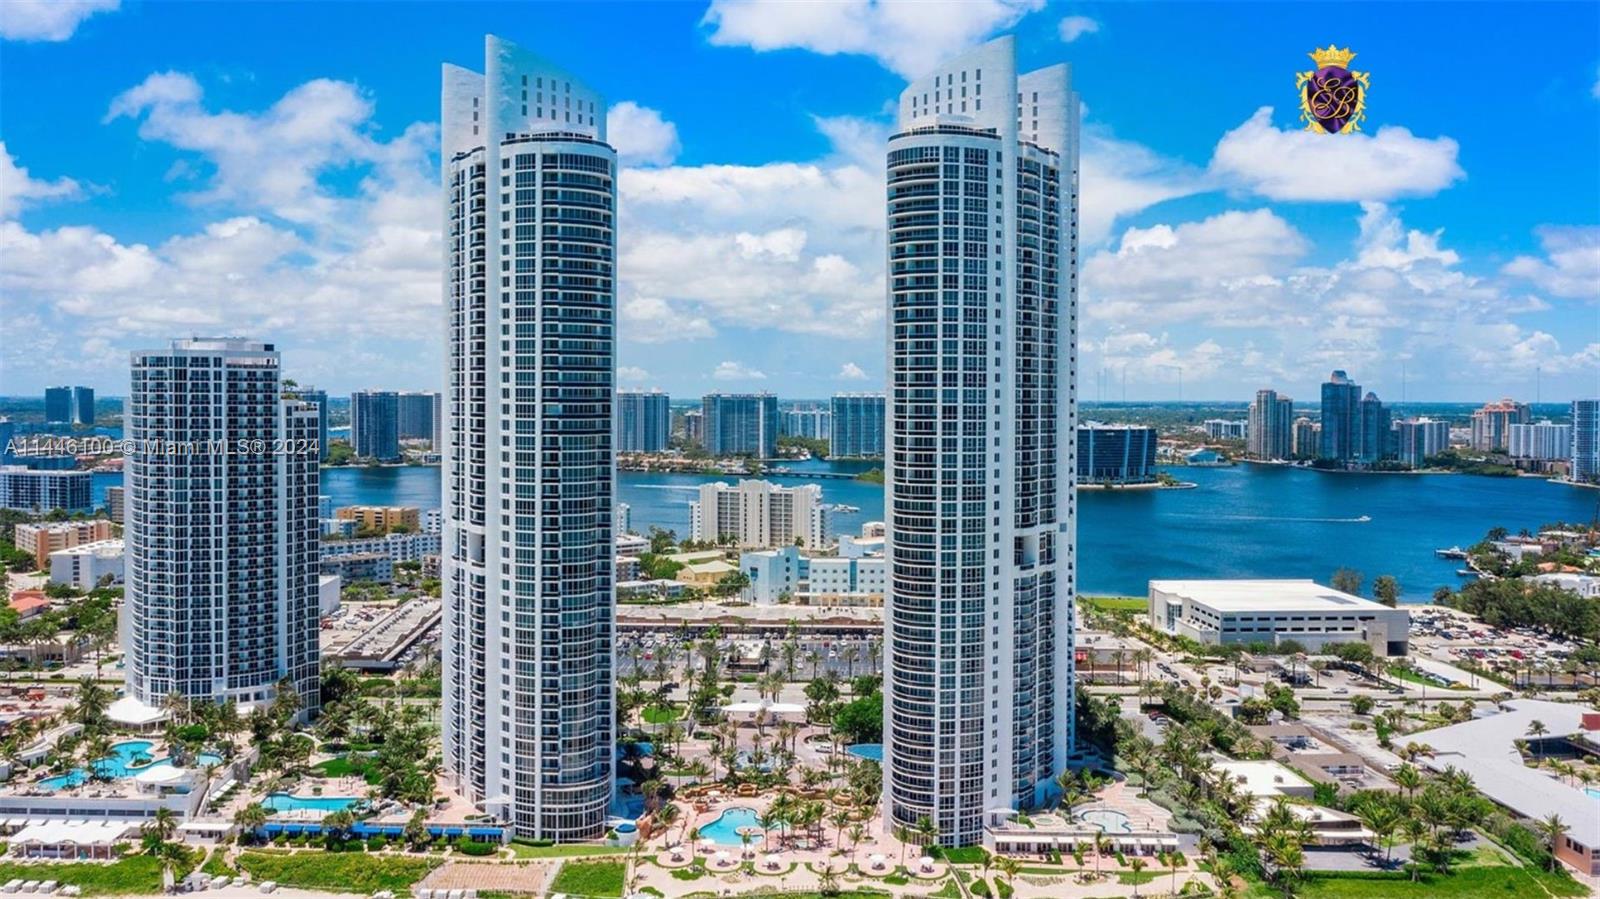 18101 Collins Ave SPA 101, Sunny Isles Beach, Florida 33160, 3 Bedrooms Bedrooms, ,3 BathroomsBathrooms,Residential,For Sale,18101 Collins Ave SPA 101,A11446100